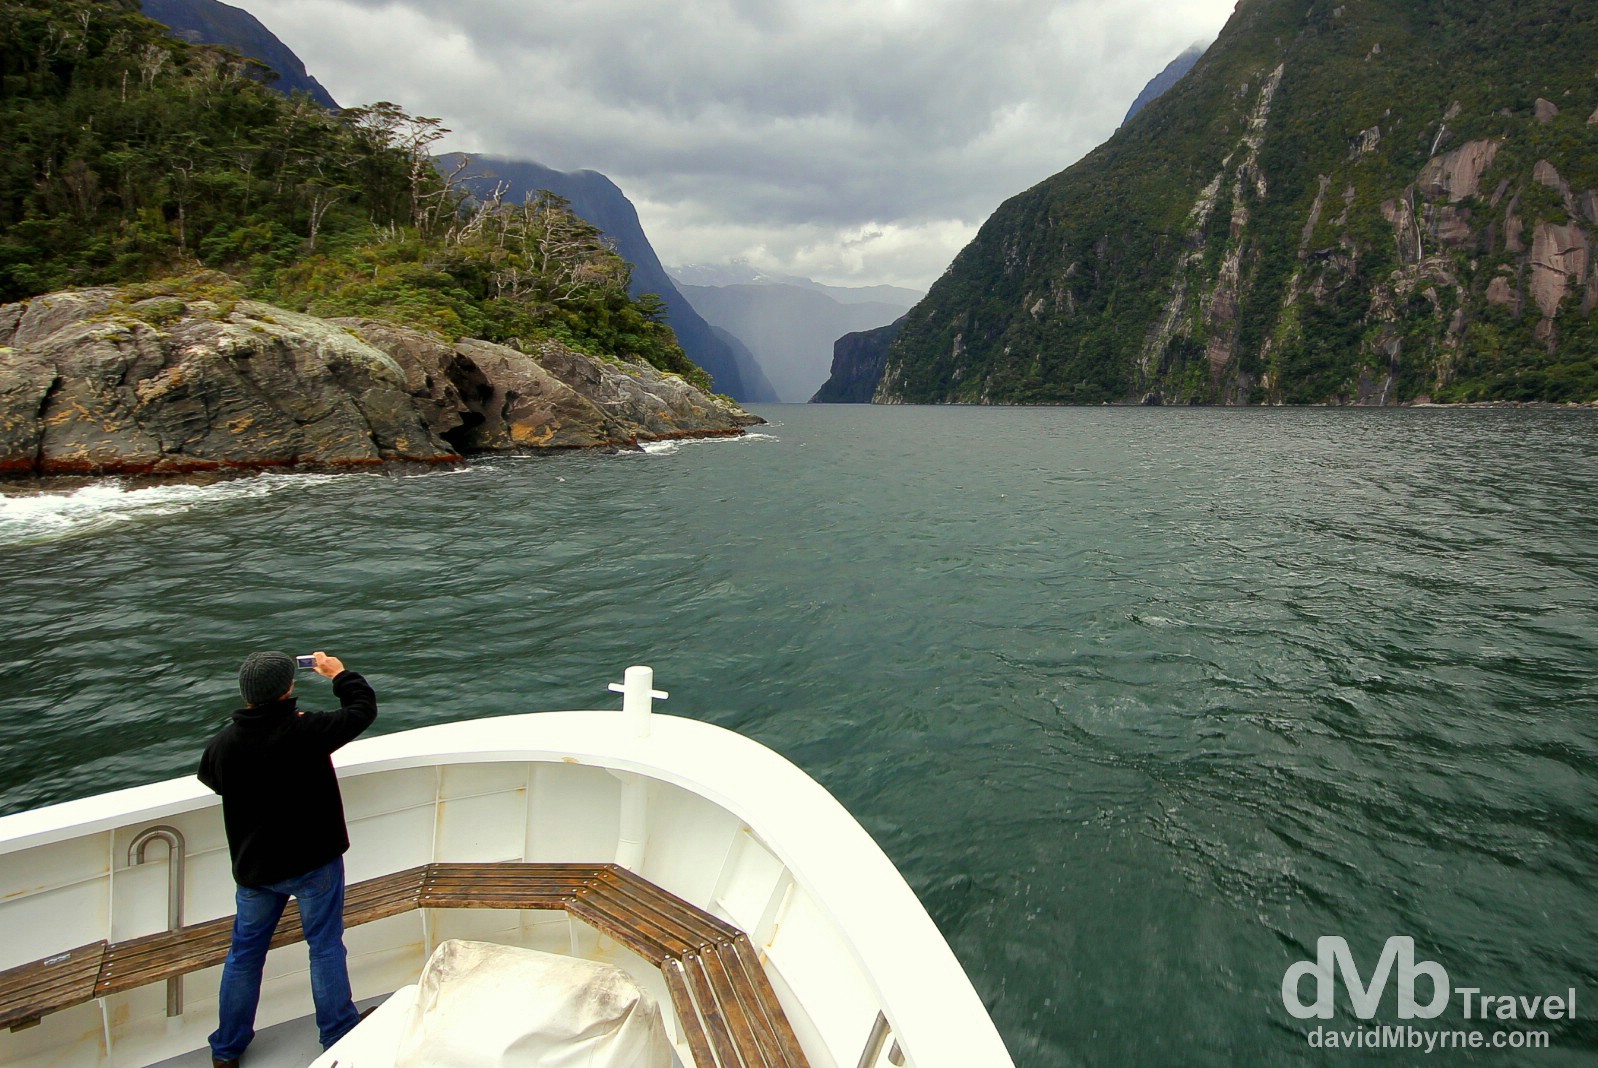 Entering Milford Sound, South Island, New Zealand. May 26th 2012.